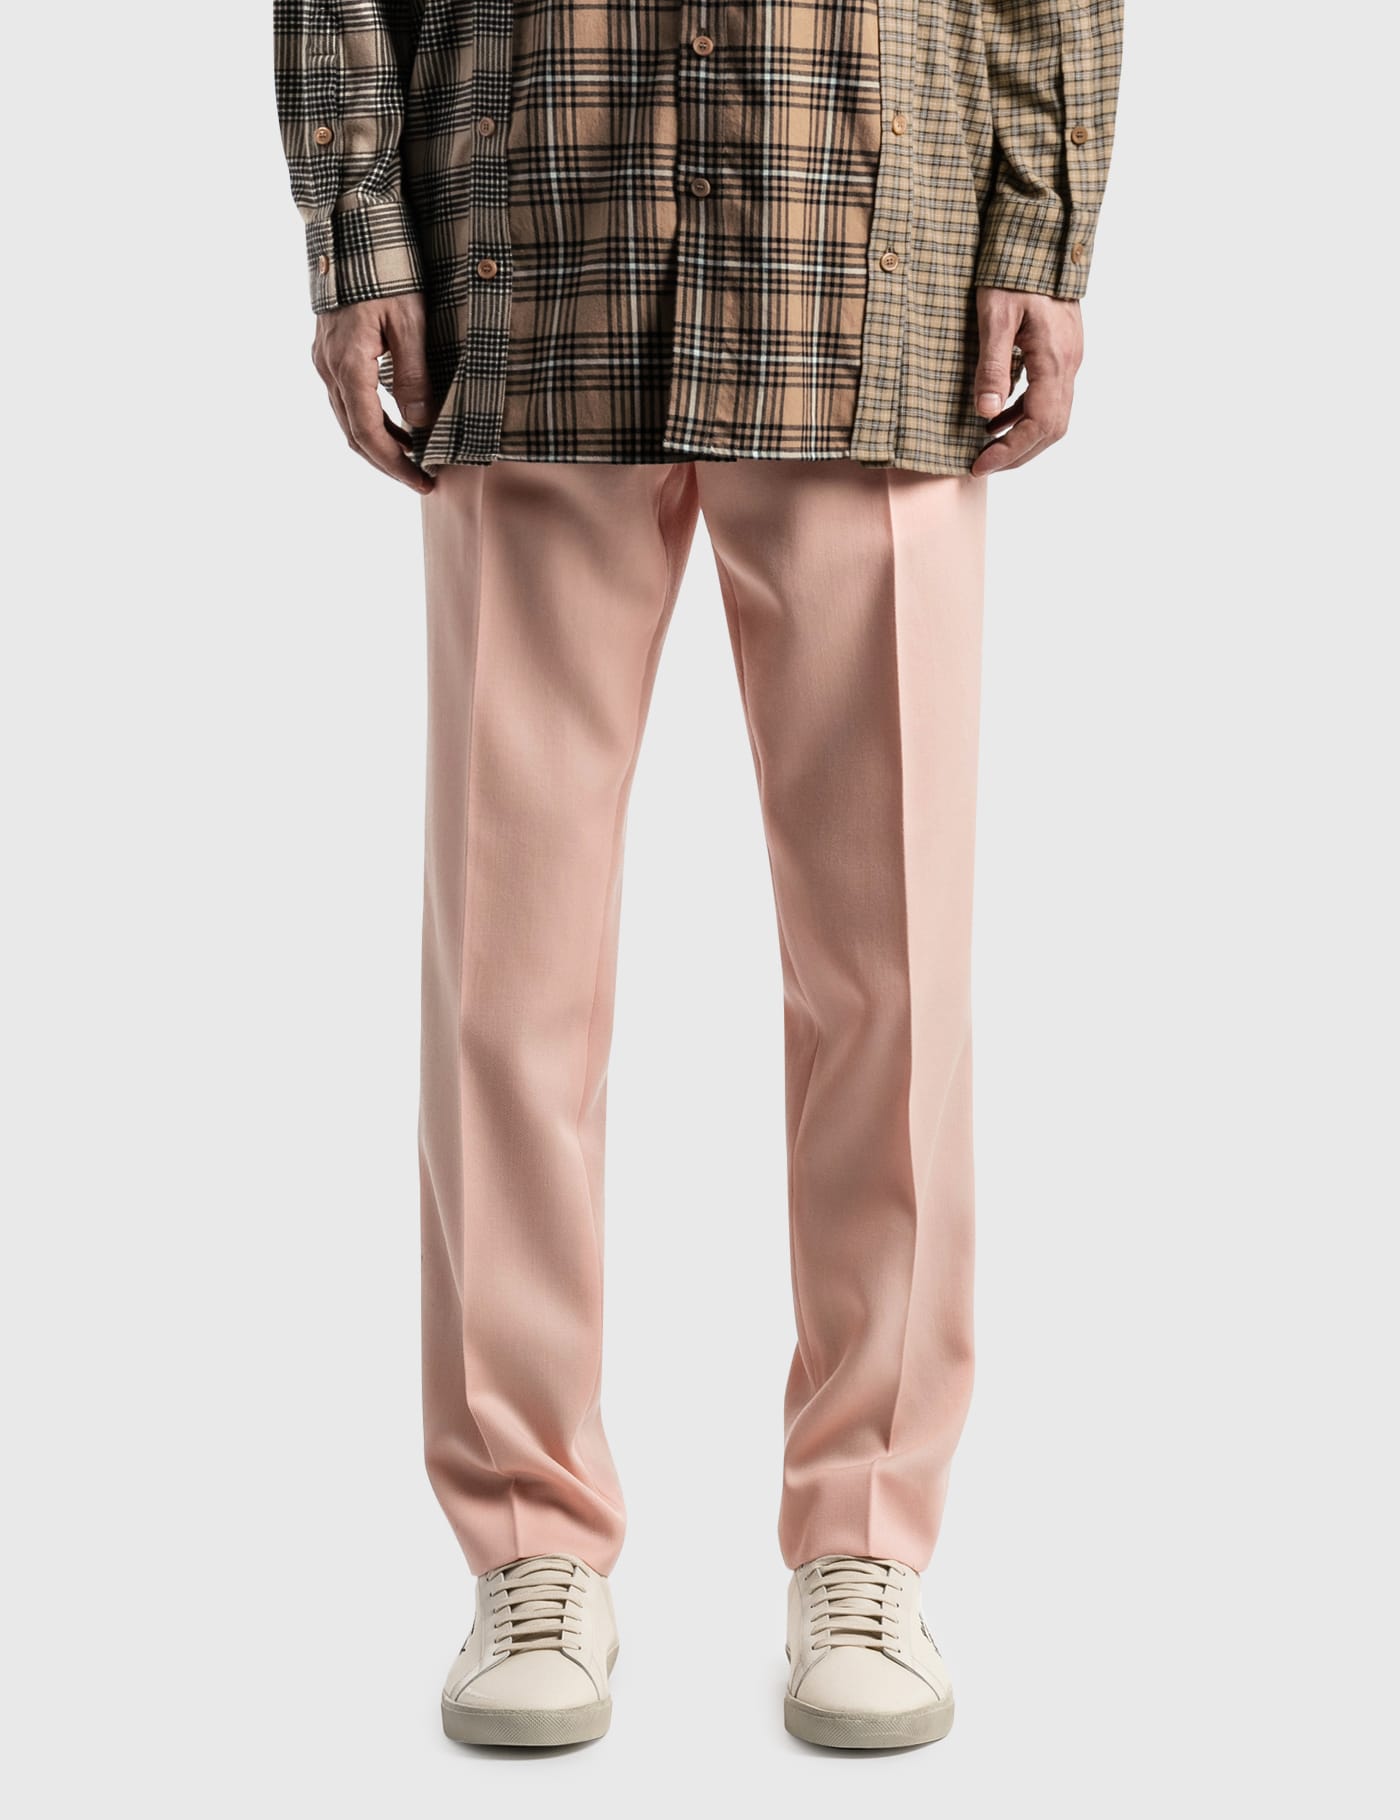 Authentic Burberry Men's Basic Slim Casual Trousers, Men's Fashion,  Bottoms, Trousers on Carousell